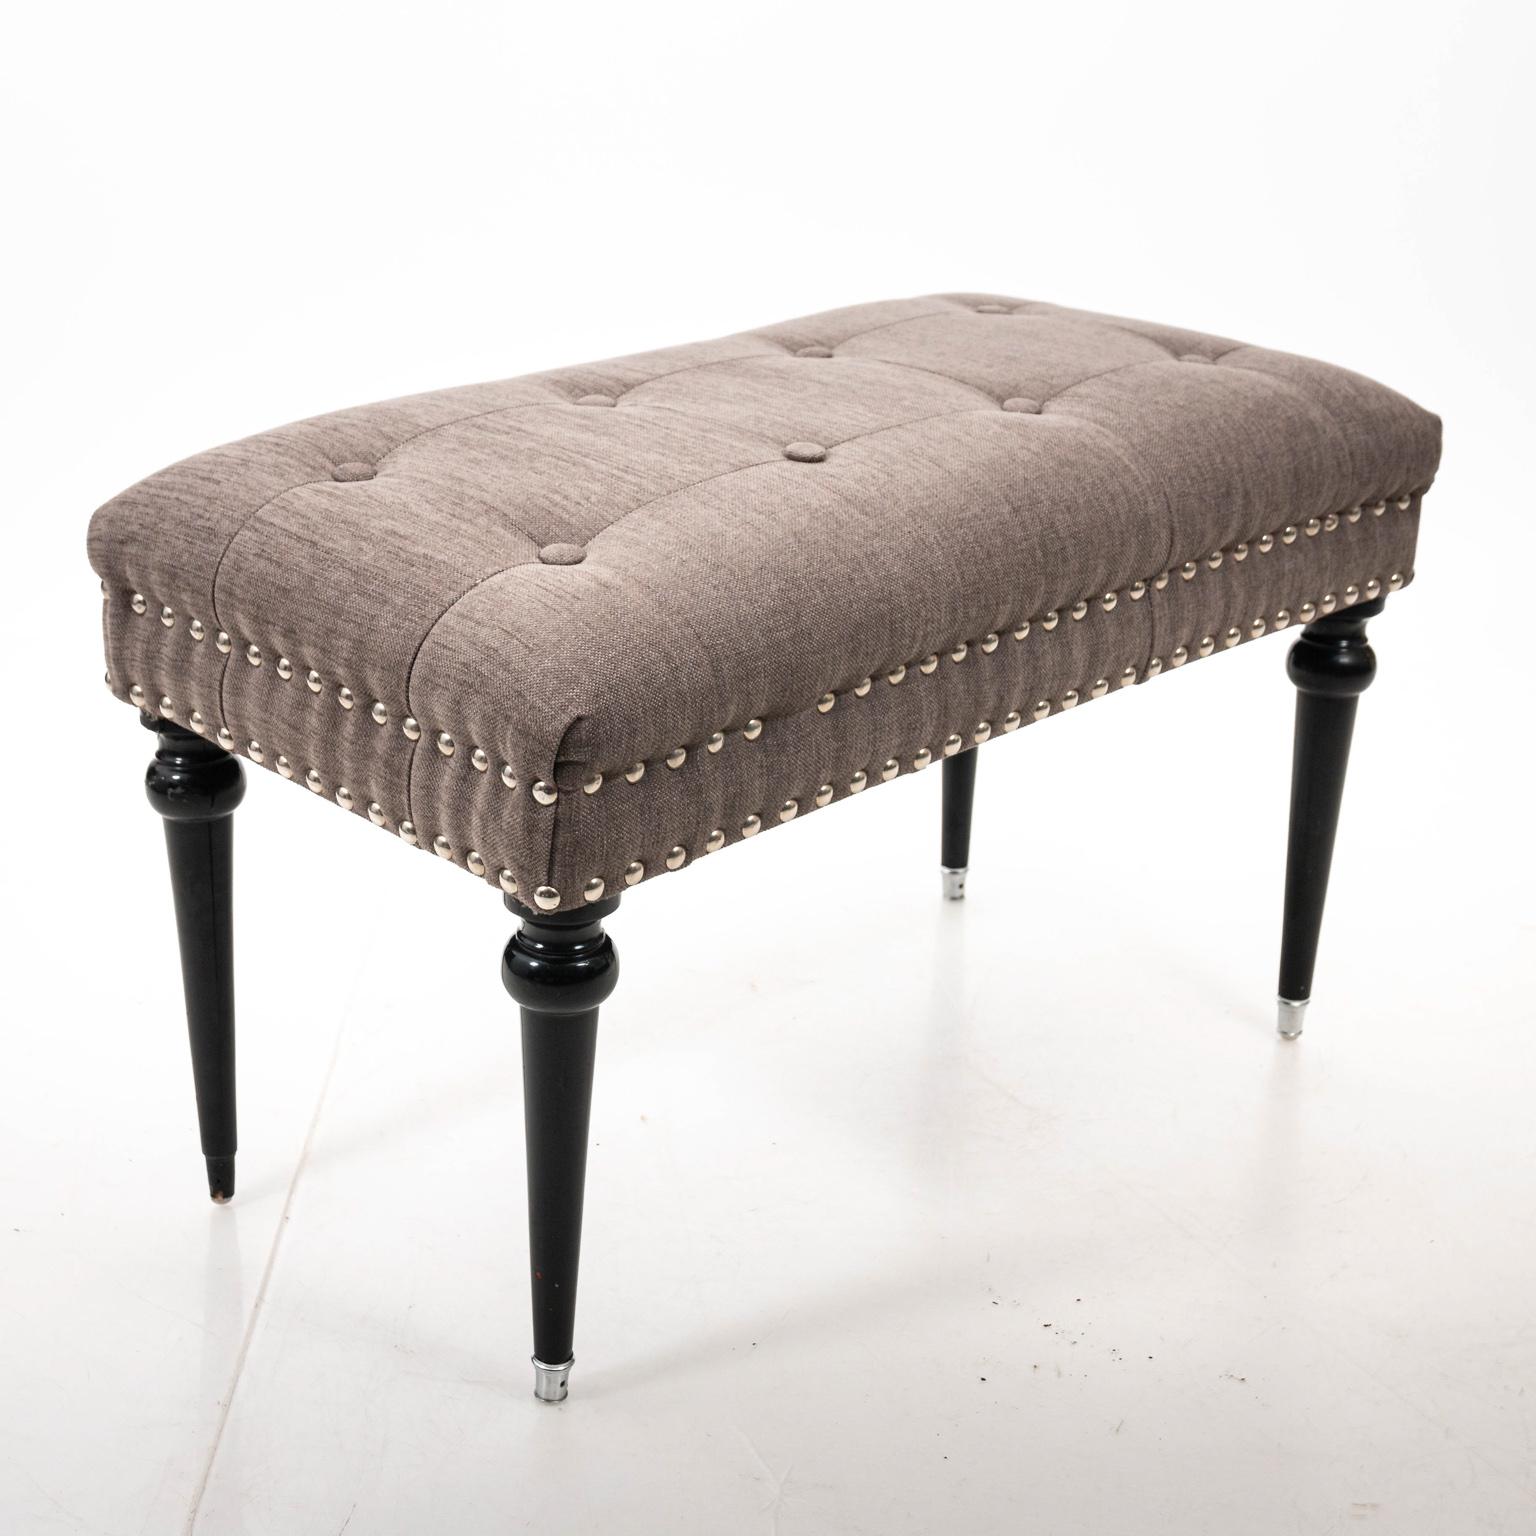 Modern black lacquered bench or stool with upholstered seat in heavy grey cotton blend, circa mid-20th century. The piece also features a tufted seat with nail head trim. Please note of wear consistent with age including minor losses with one